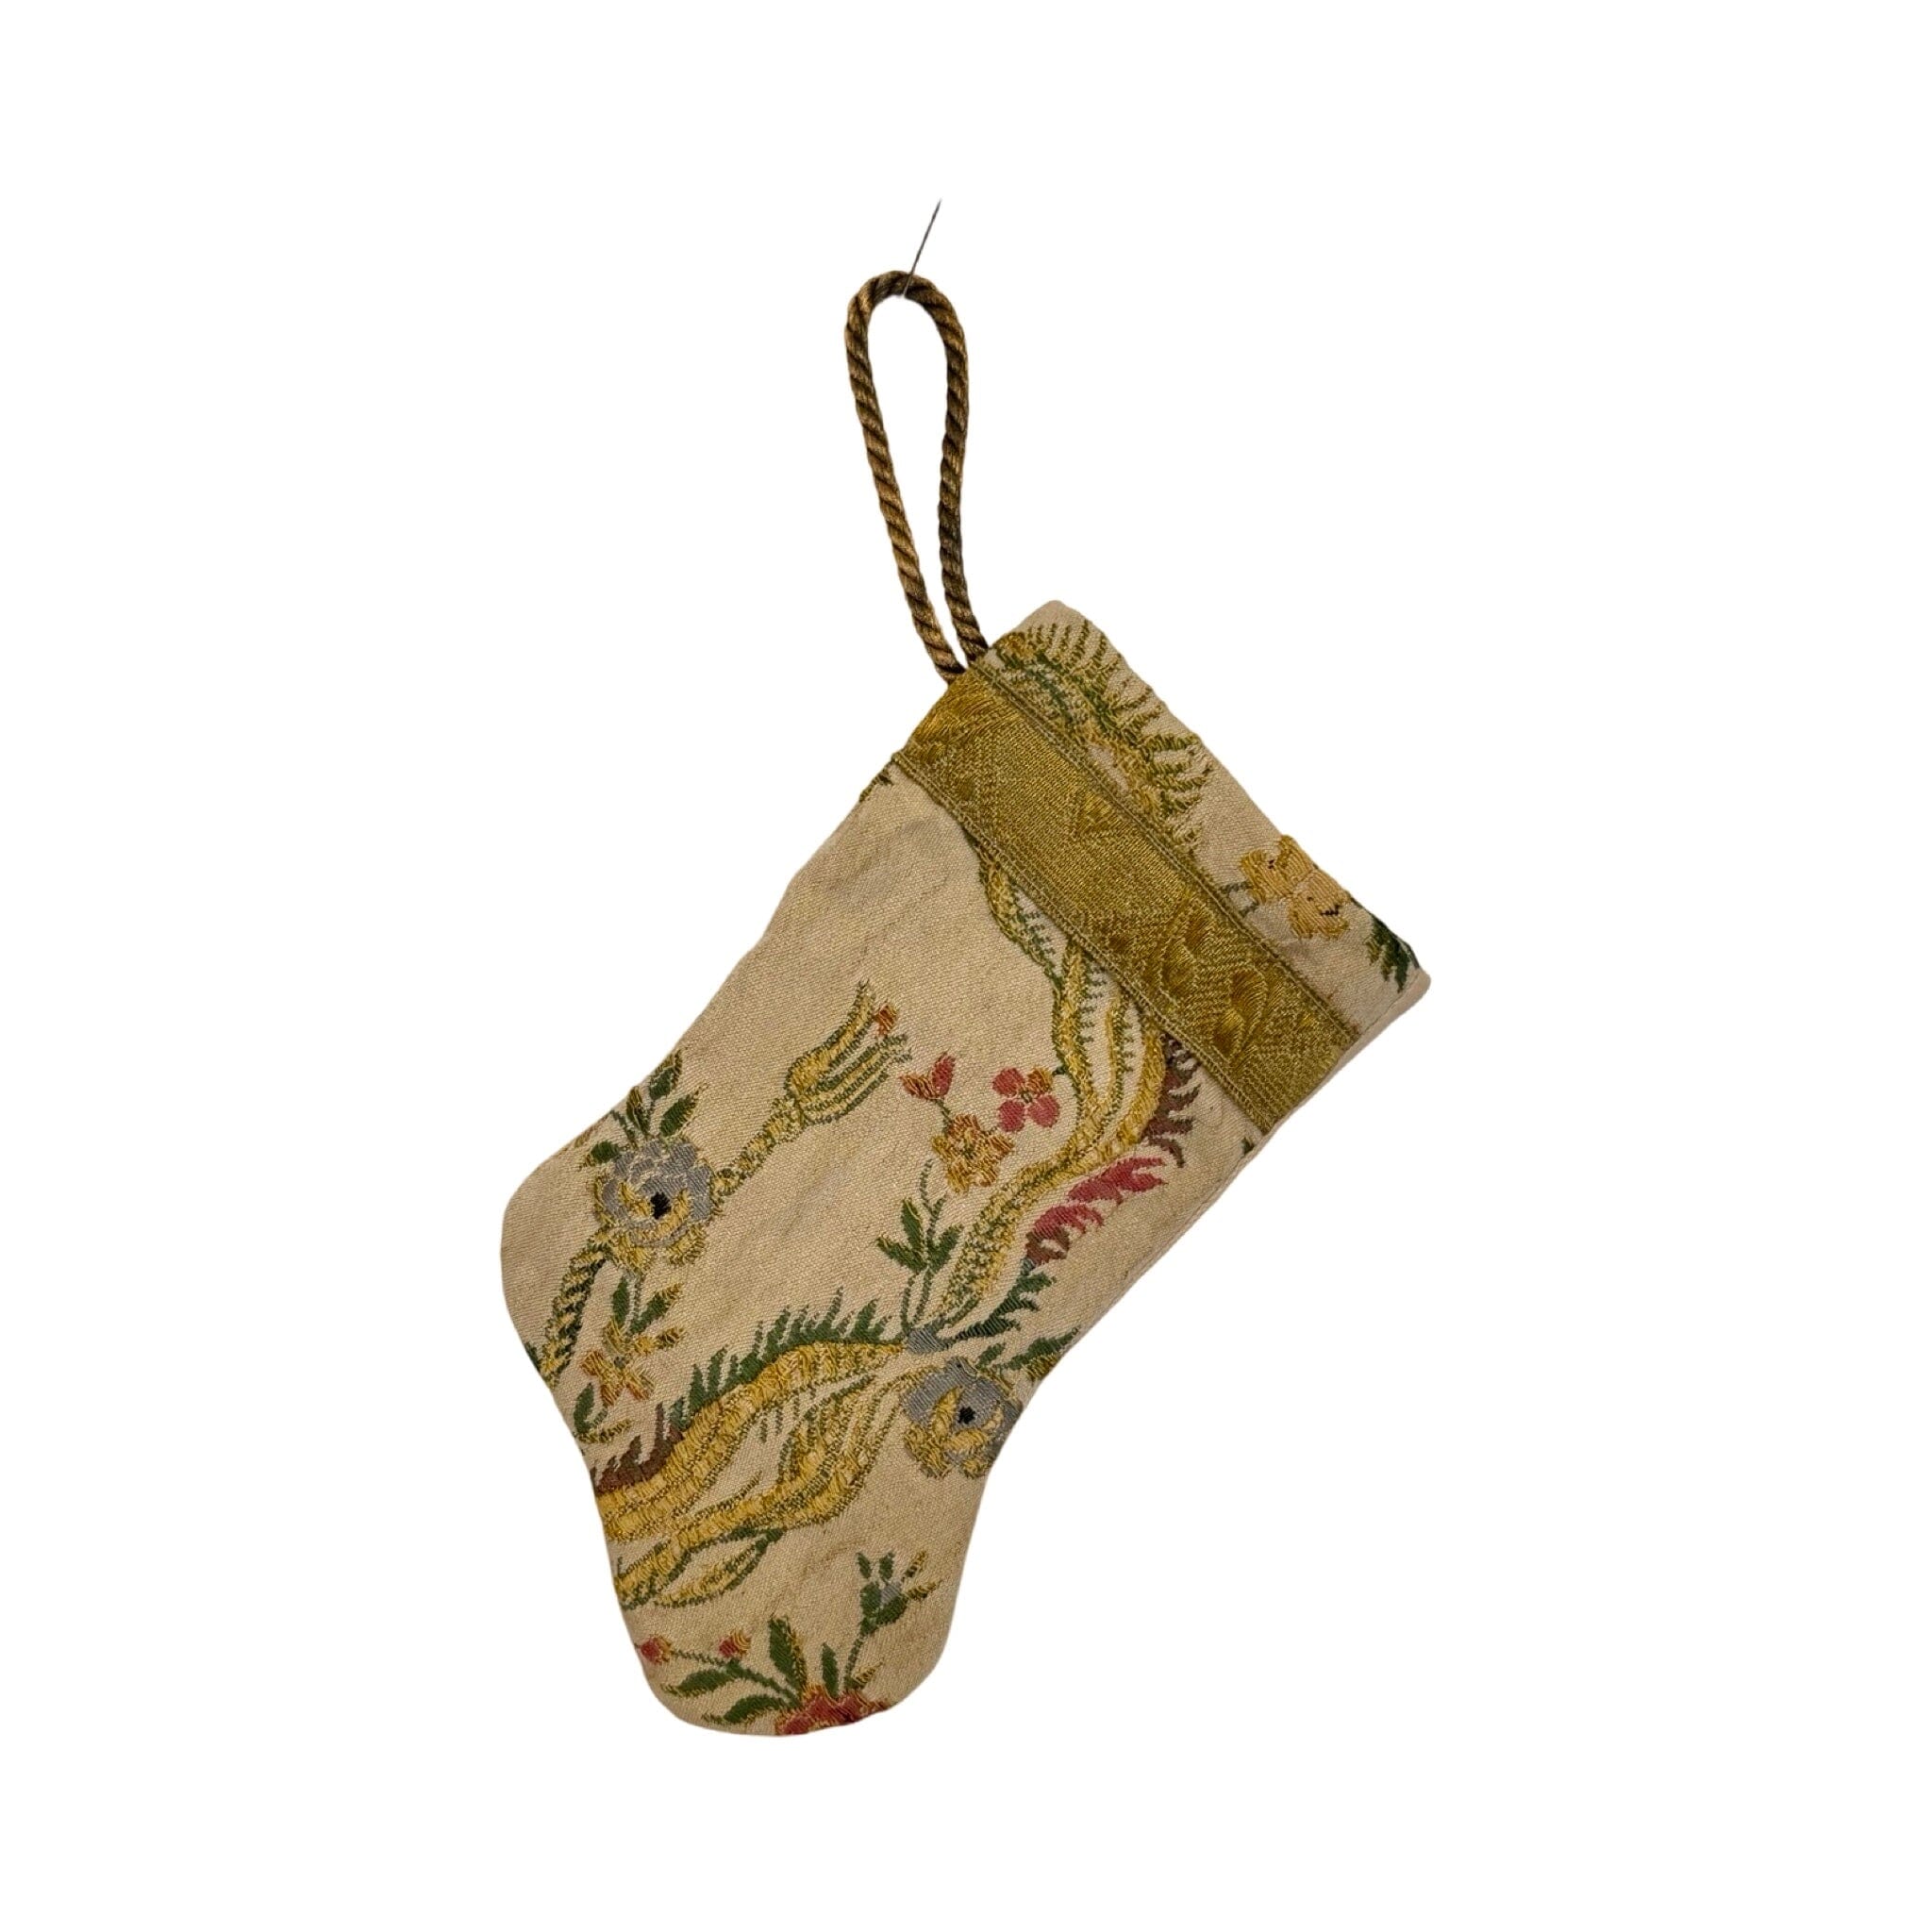 Handmade Mini Stocking Made From Vintage Fabric and Trims- Antique Sand Floral Ornament B. Viz Design F 